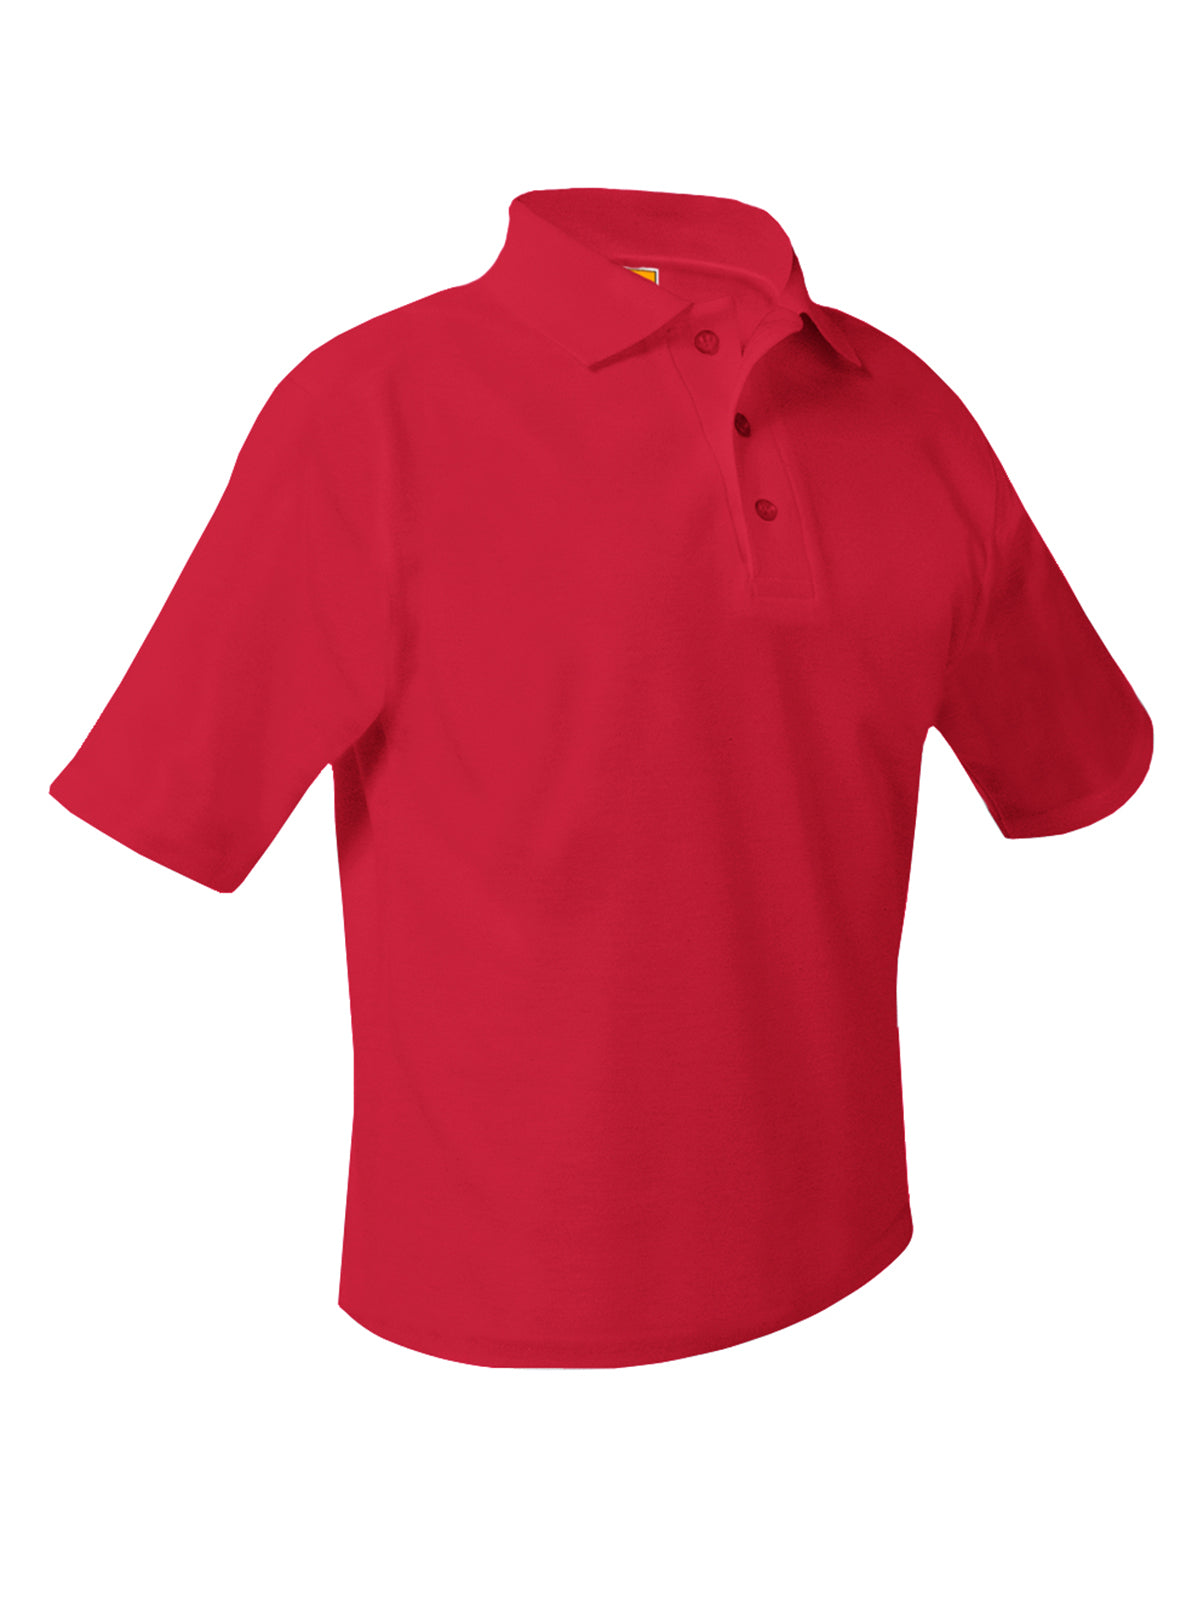 Unisex Adults and Kids Polo - 8760 - Red